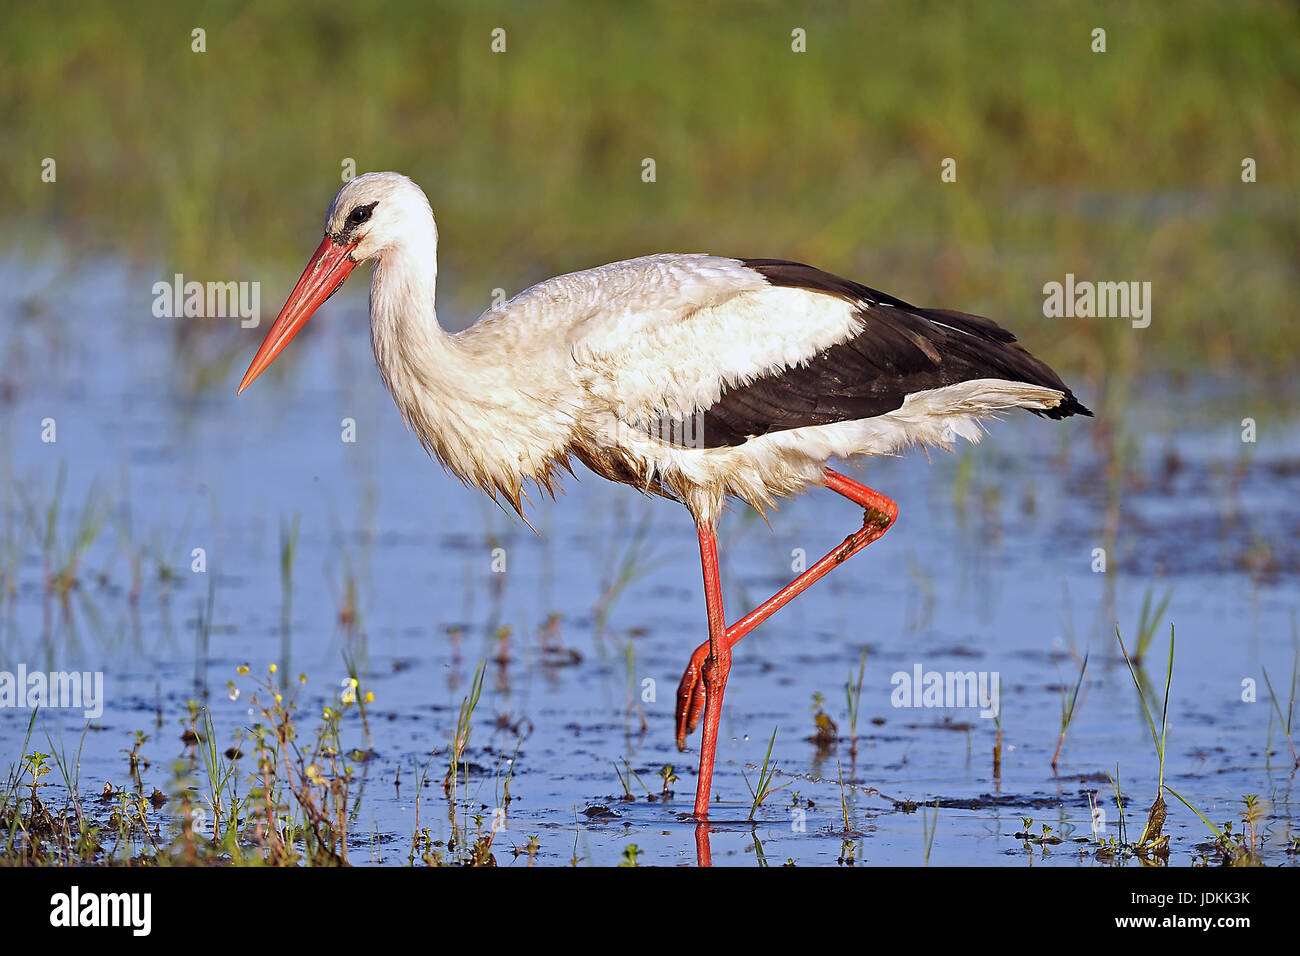 Weissstorch, Ciconia ciconia, White Stork Stock Photo